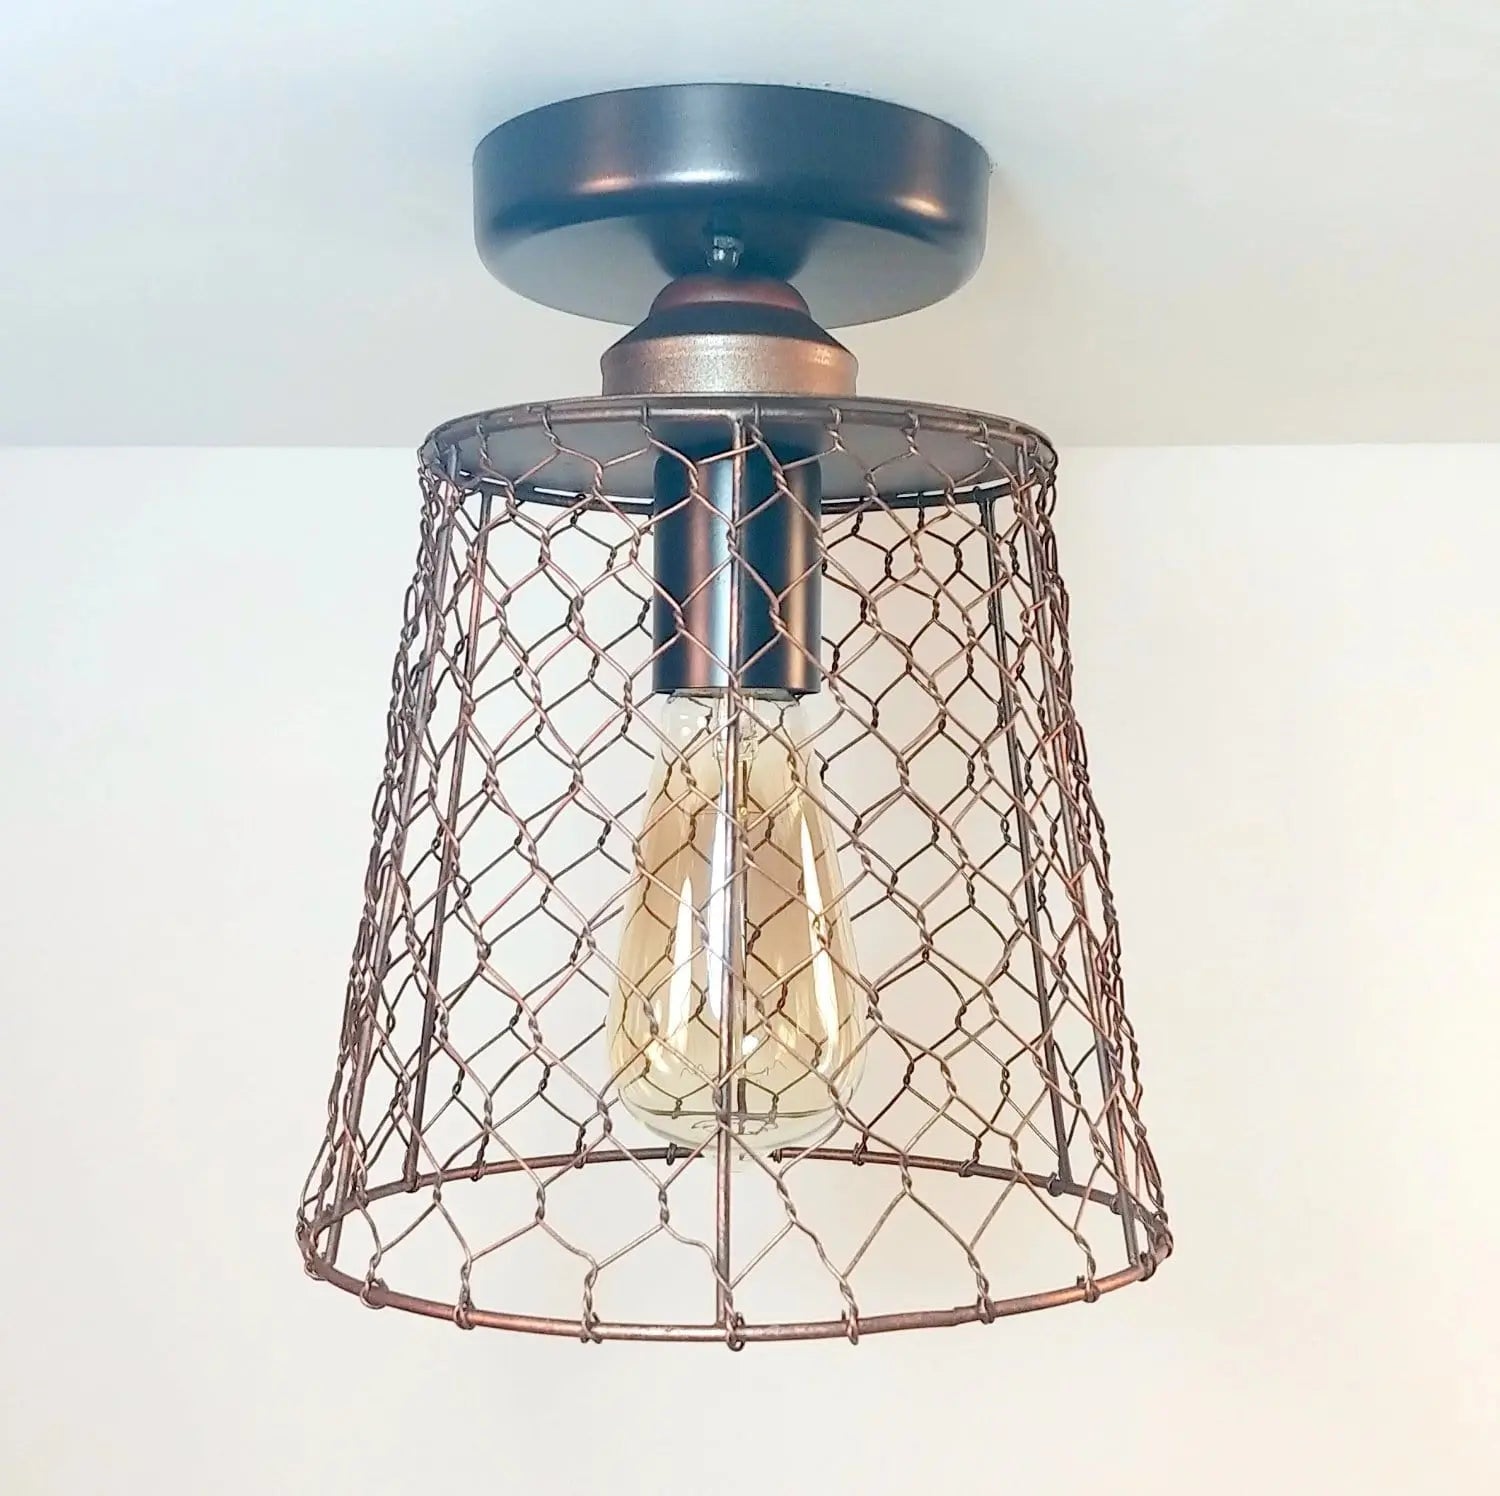 Chicken Wire Copper Tone Ceiling Light The Lamp Goods